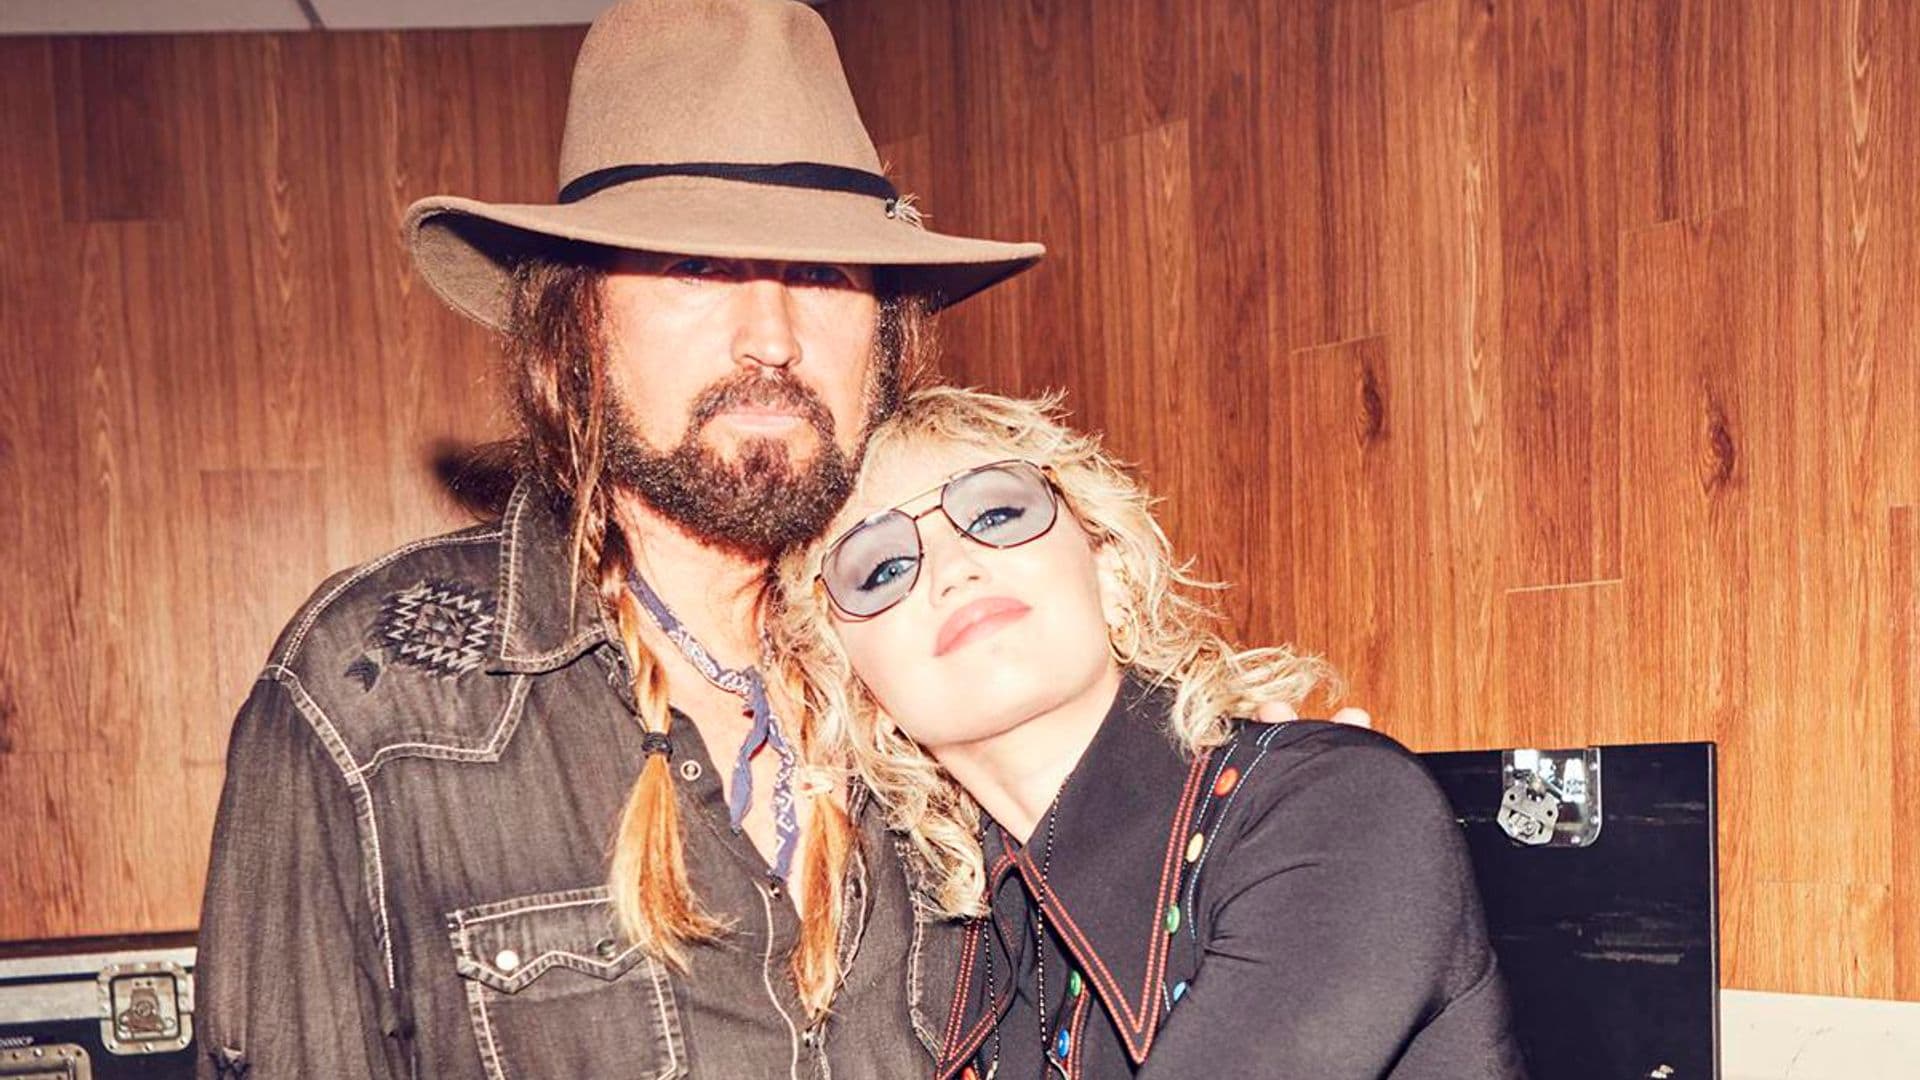 Miley Cyrus says her mom is the one who raised her amid rumored rift with Billy Ray Cyrus